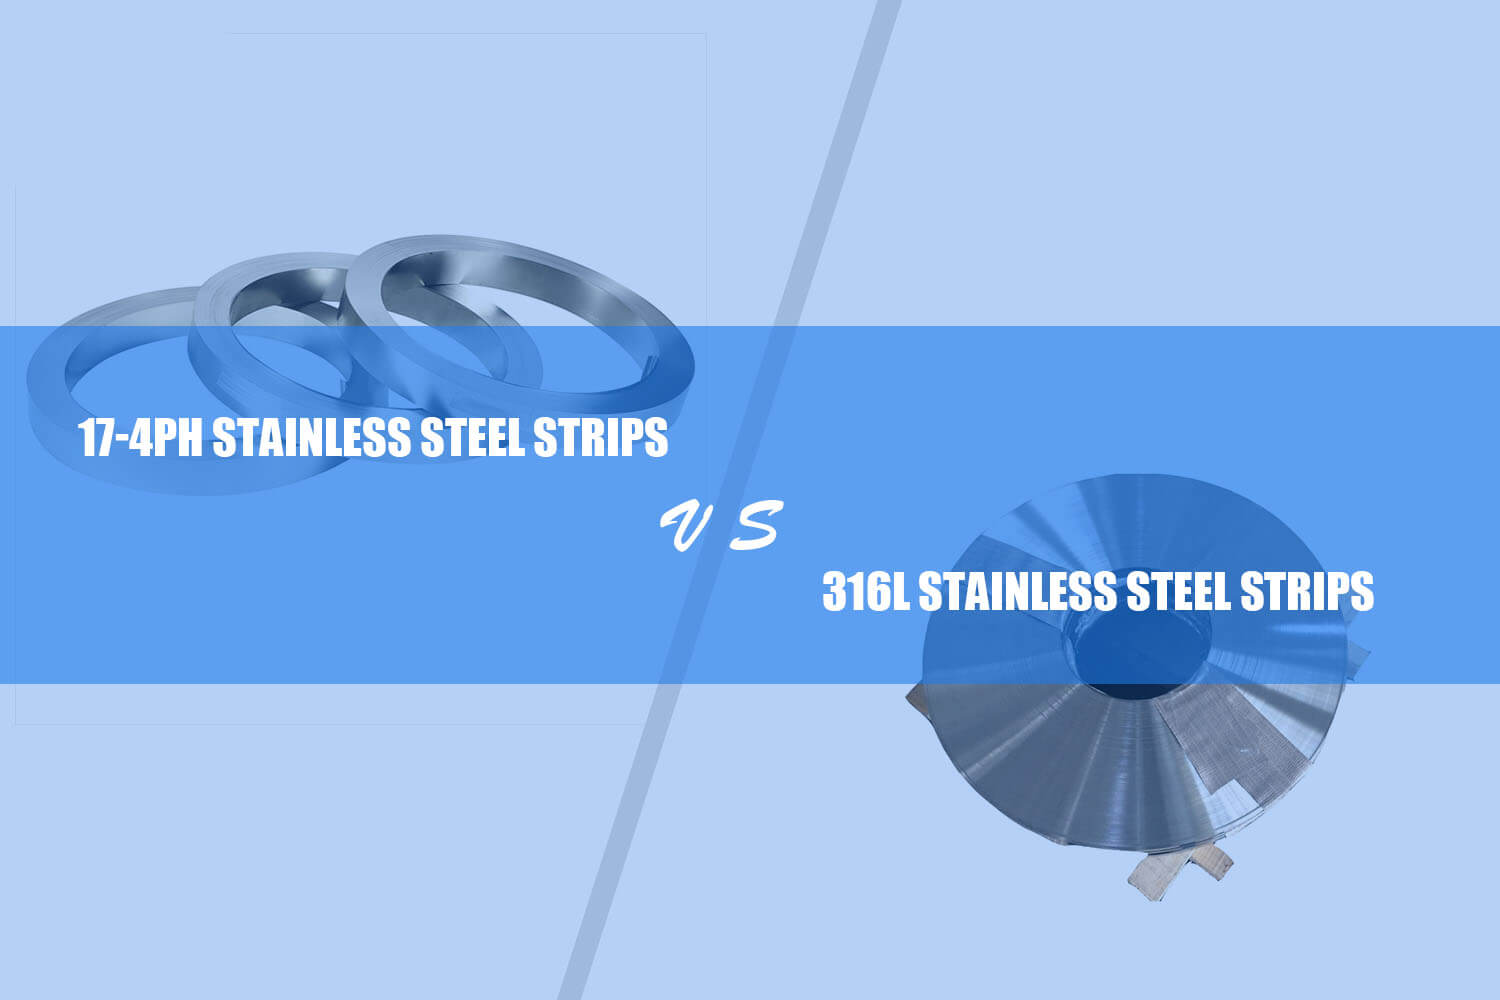 the difference between 17-4PH and 316L stainless steel strip